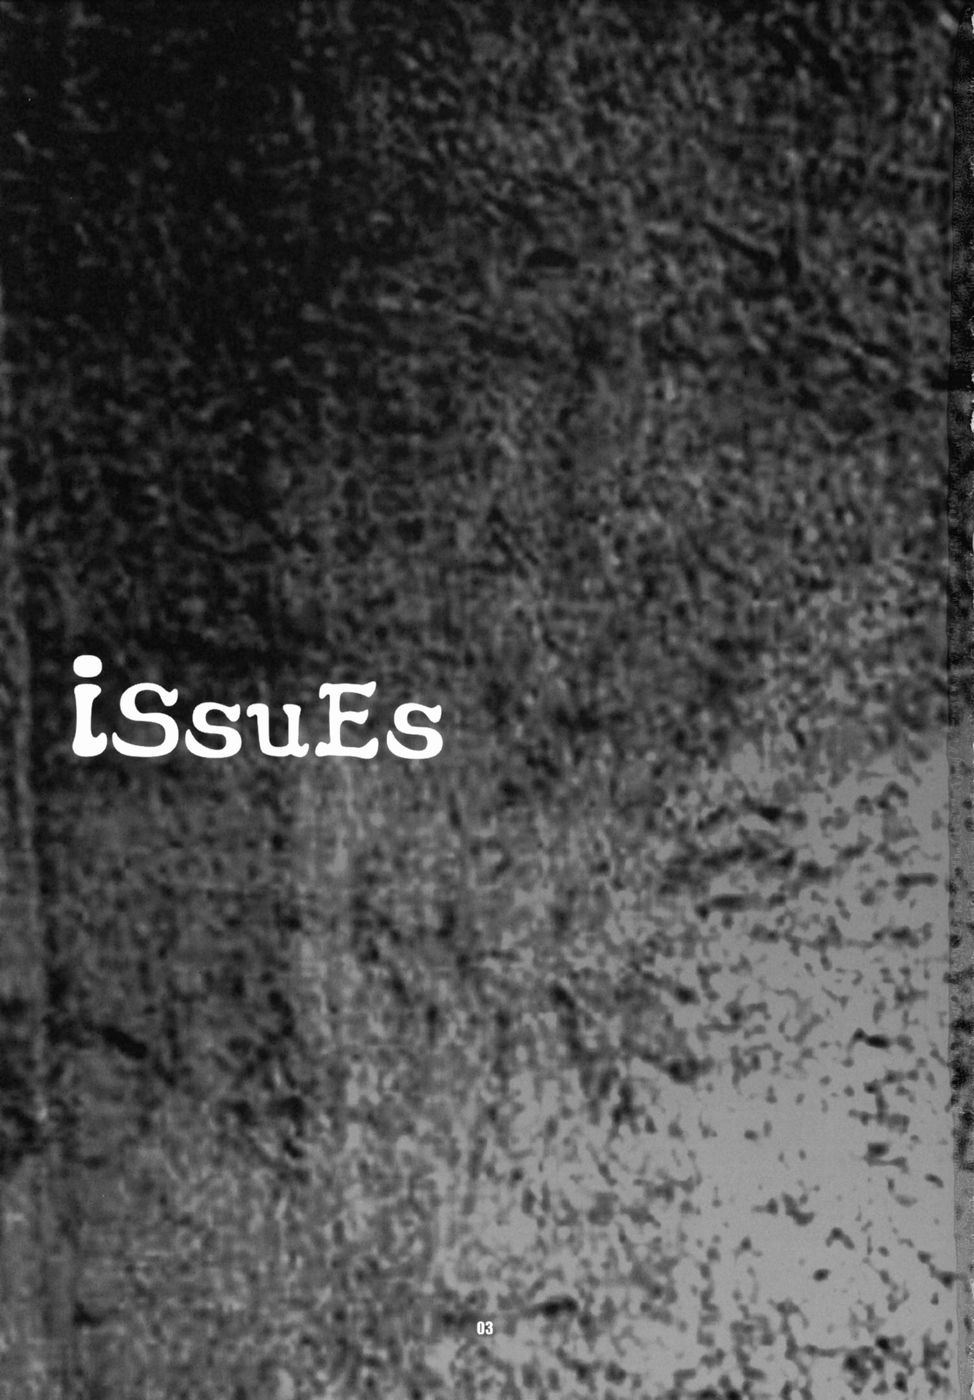 (C68) [Celluloid-Acme] Issues (Naruto) [Celluloid-Acme] Issues (ナルト)